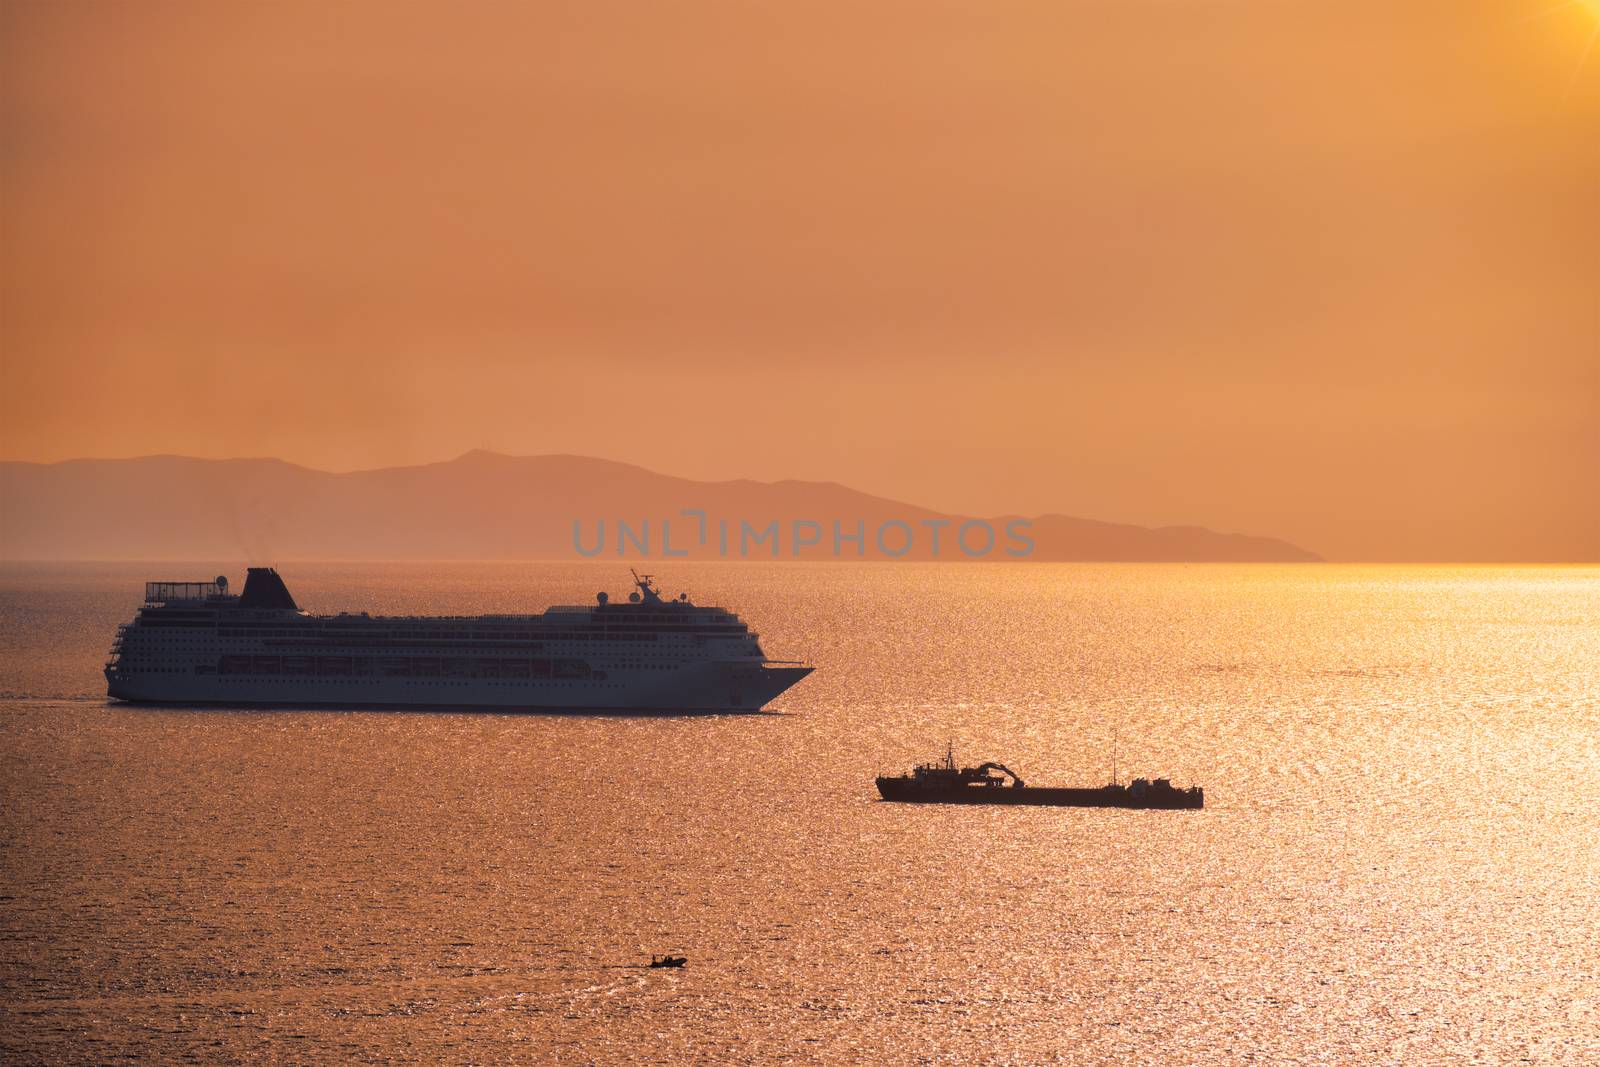 Cruise ship silhouette in Aegean sea on sunset by dimol